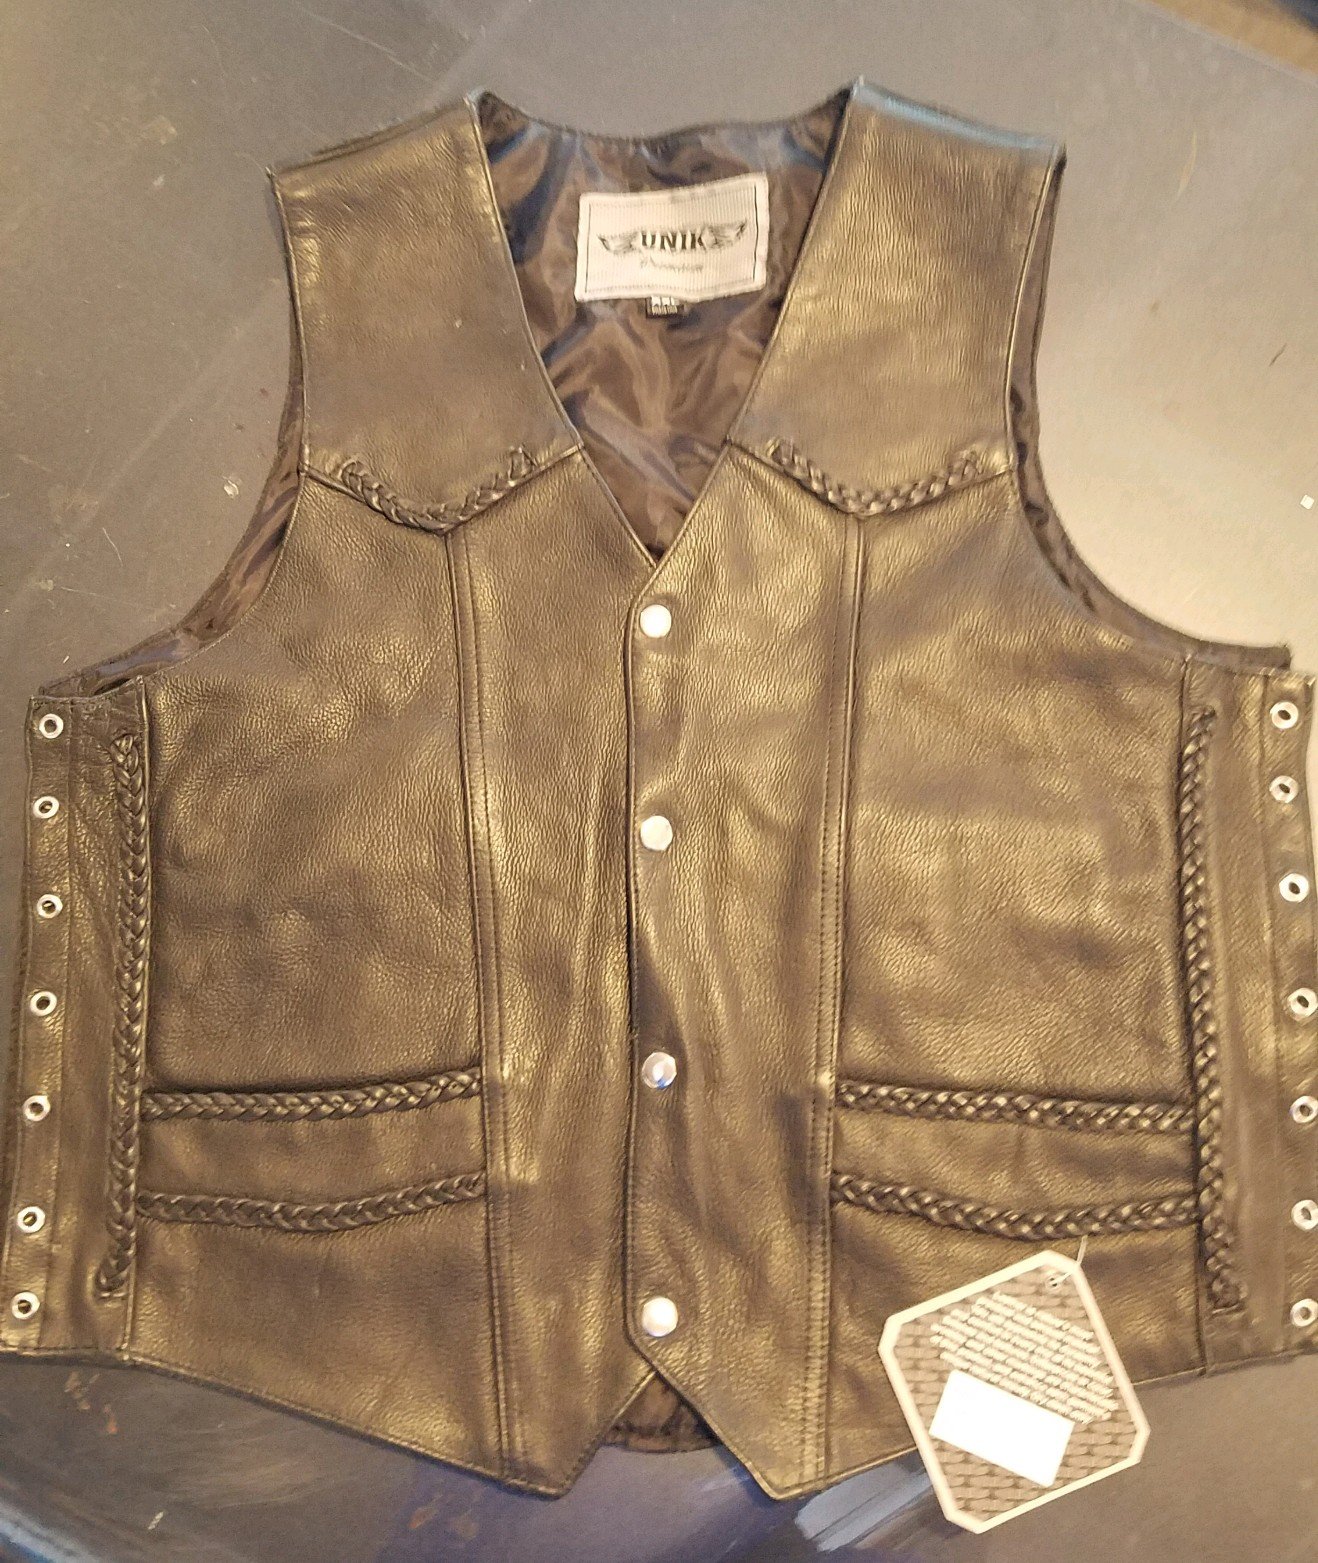 Unik 605 leather vest SPF - SASS Wire Classifieds - SASS Wire Forum